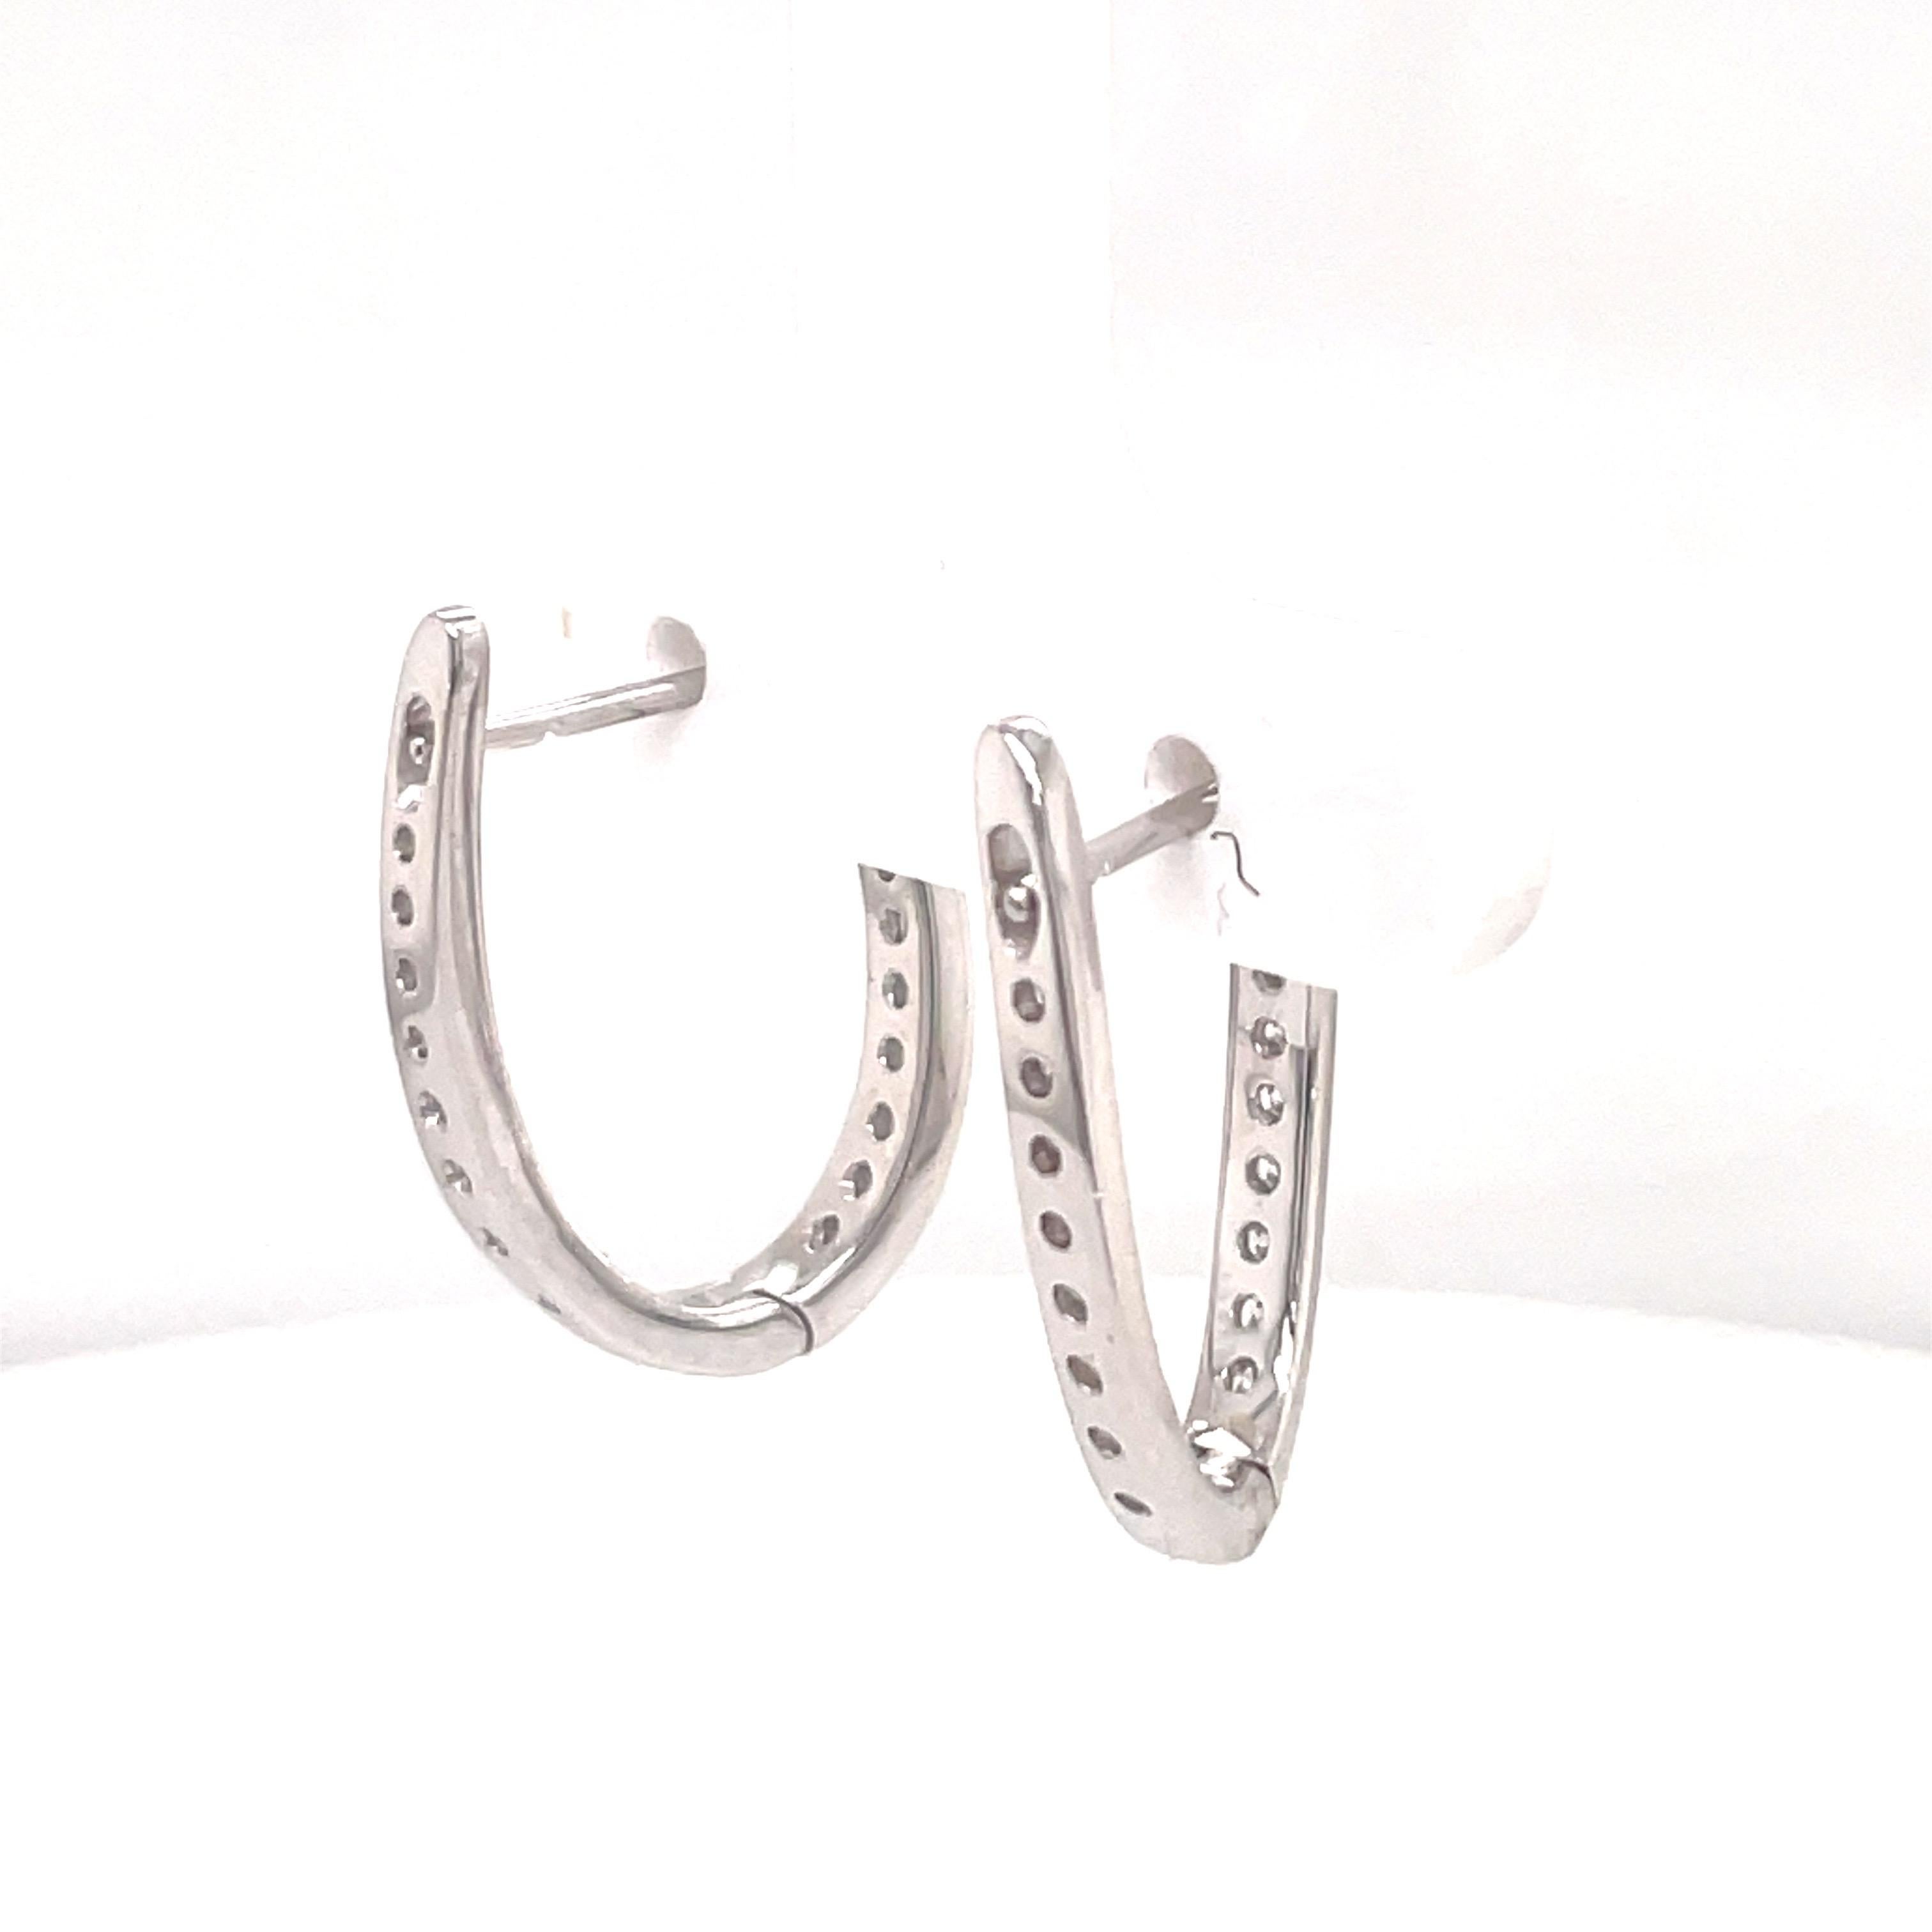 In and Out Diamond Hoop Earrings 0.65 Carats 14 Karat White Gold 3.5 Grams For Sale 2